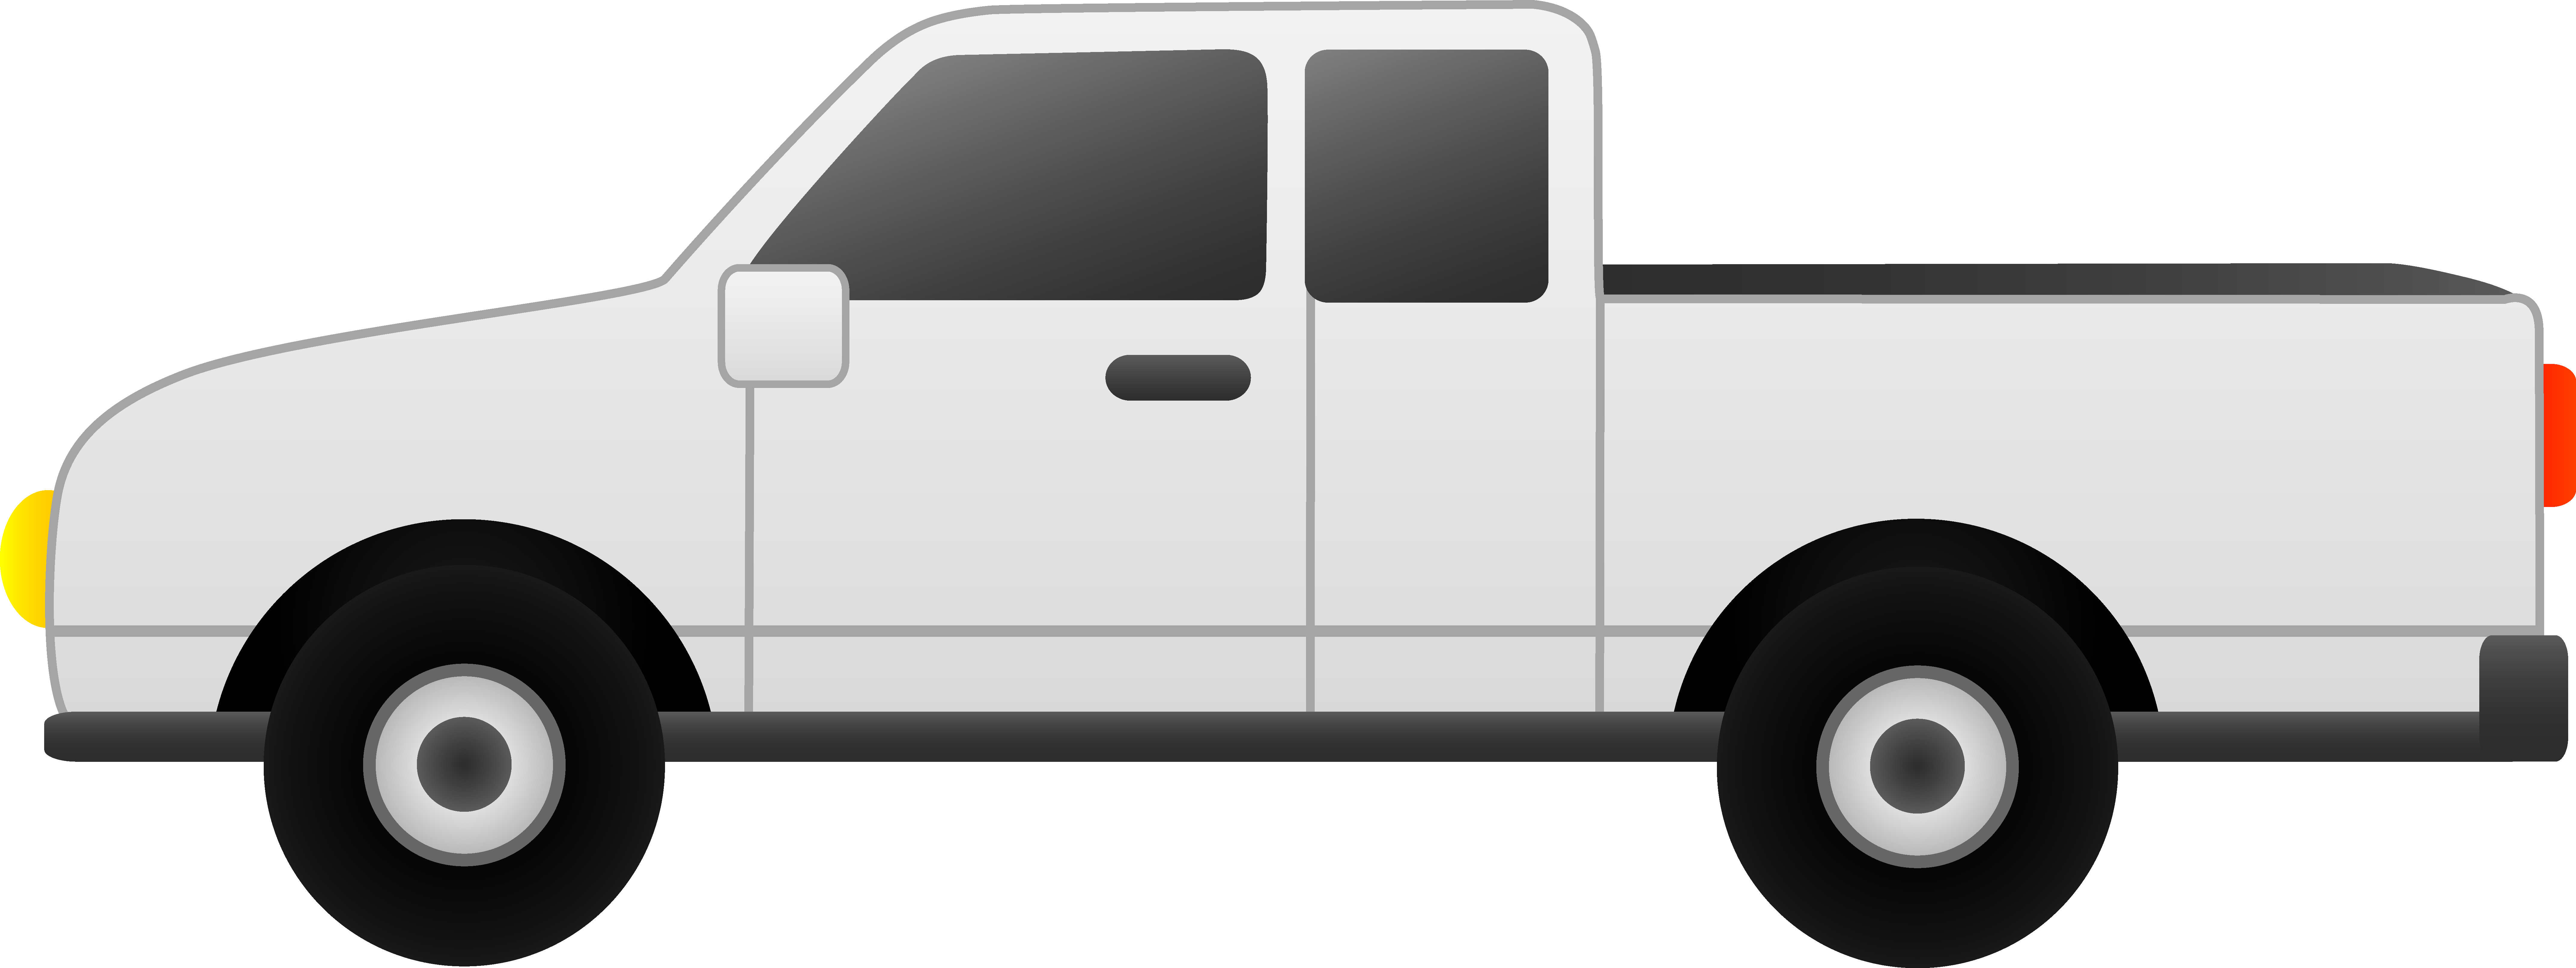 Free clipart truck. Clean up toys panda